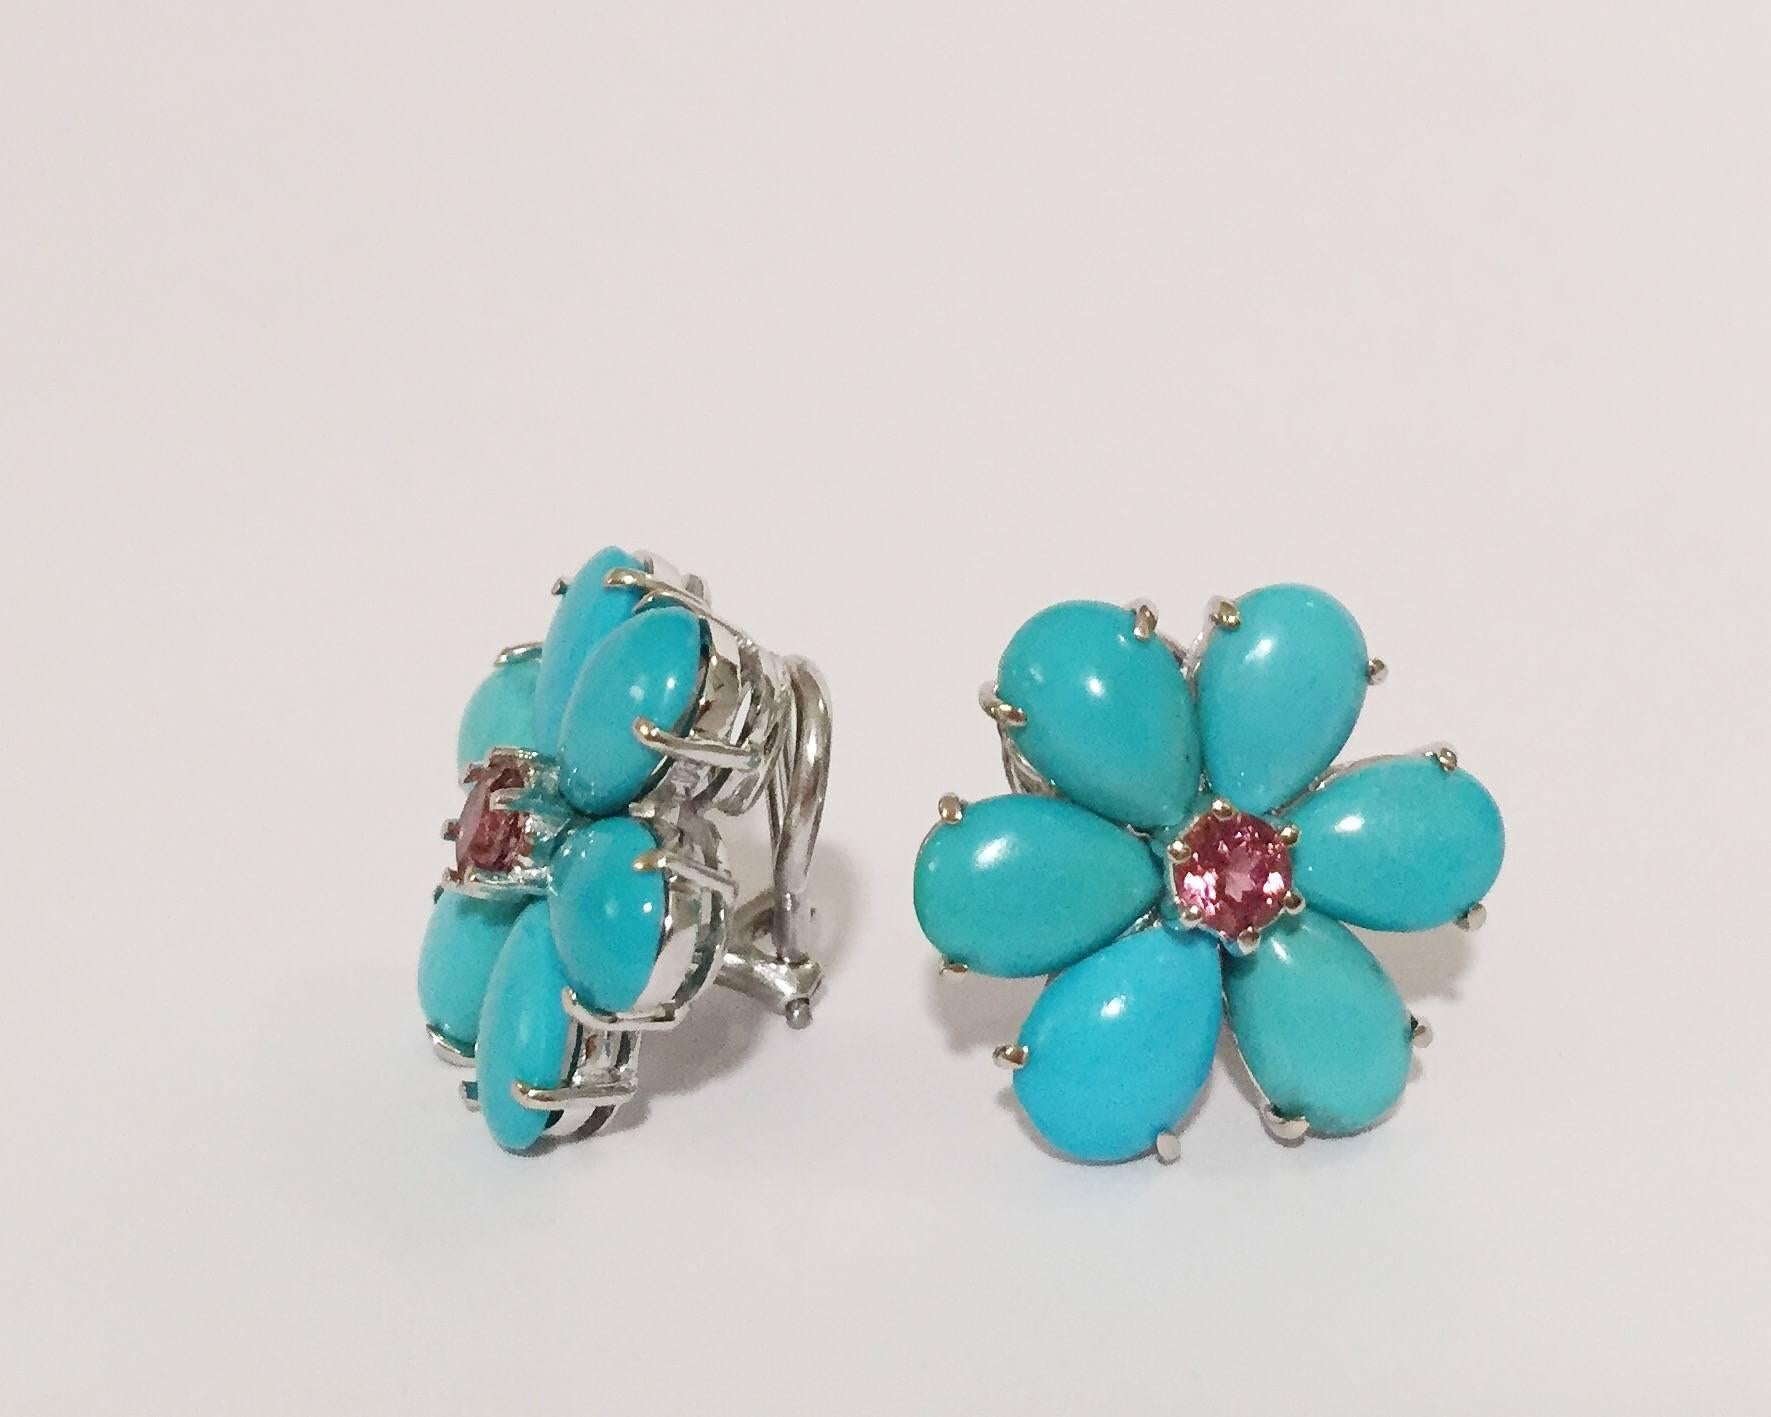 18kt White Gold Turquoise Flower Earring with 12 Pear shaped print set Turquoise surrounding a print set Faceted Rubellite Center.

The earrings measure 3/4